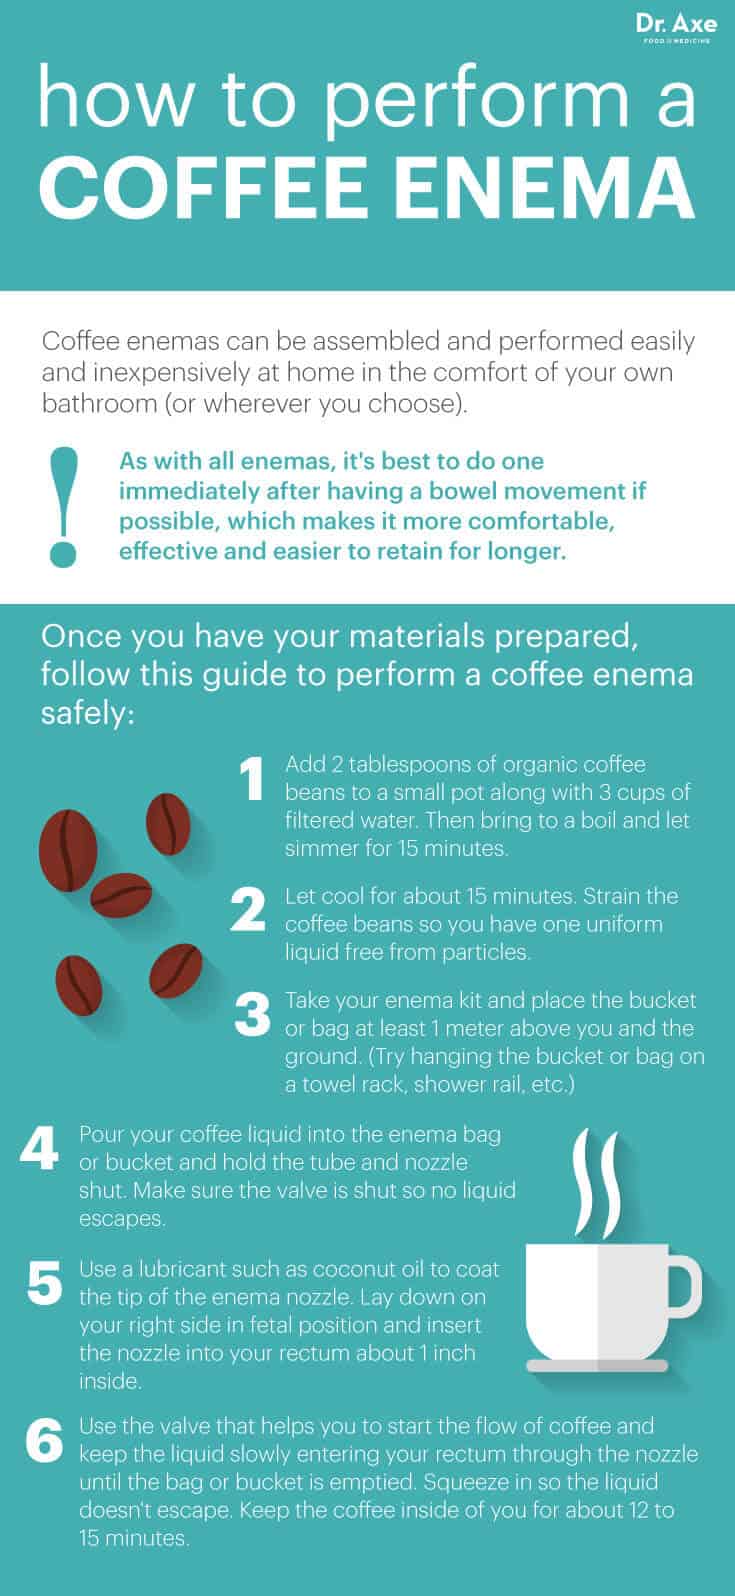 How to perform a coffee enema - Dr. Axe